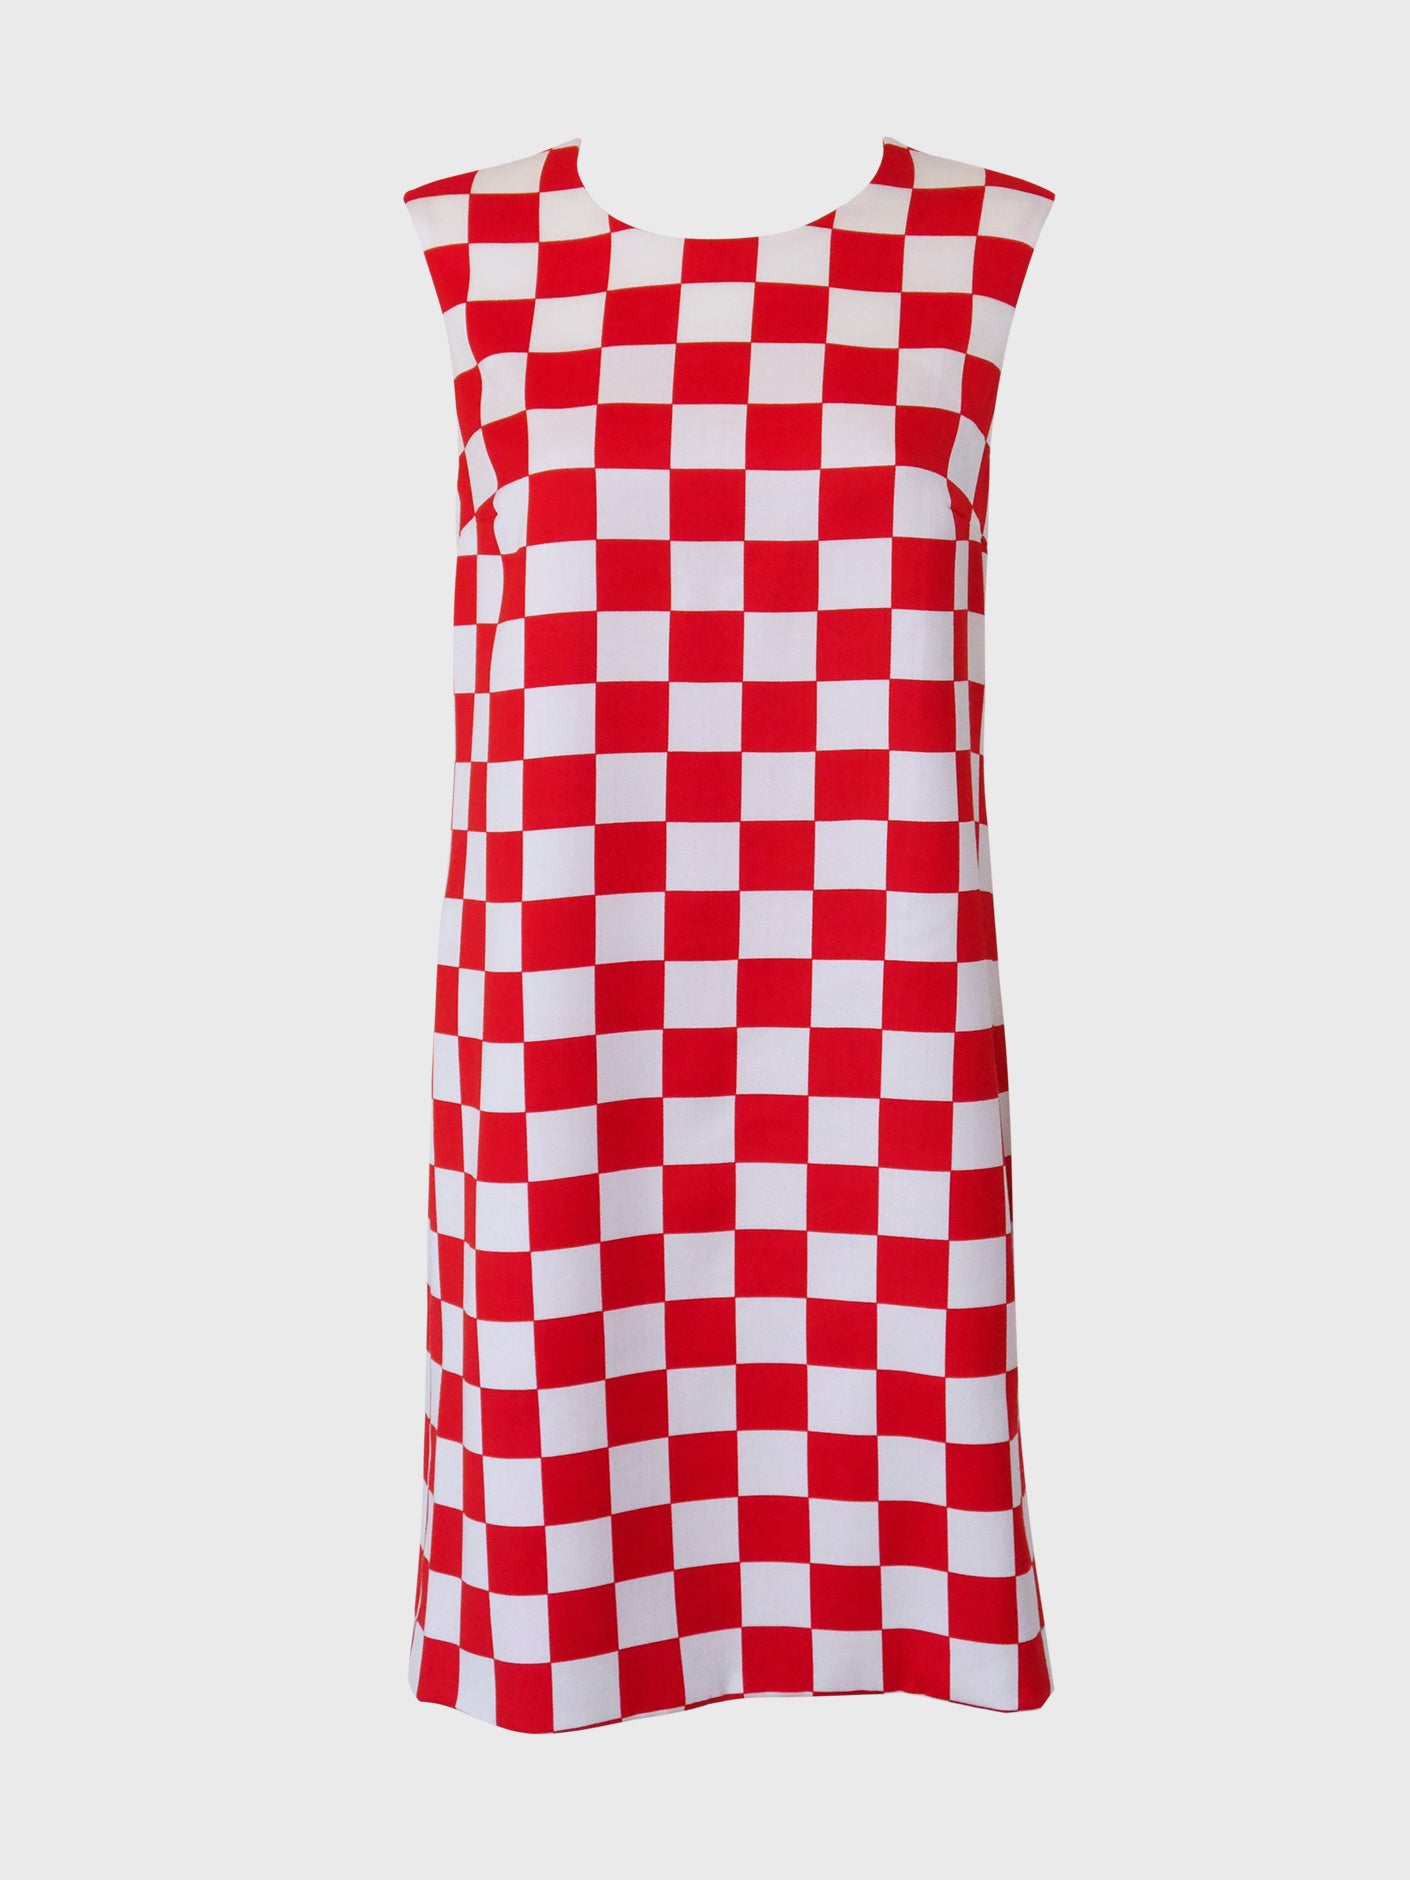 GIANNI VERSACE Couture Fall 1995 Vintage Checkered Shift Dress Size S